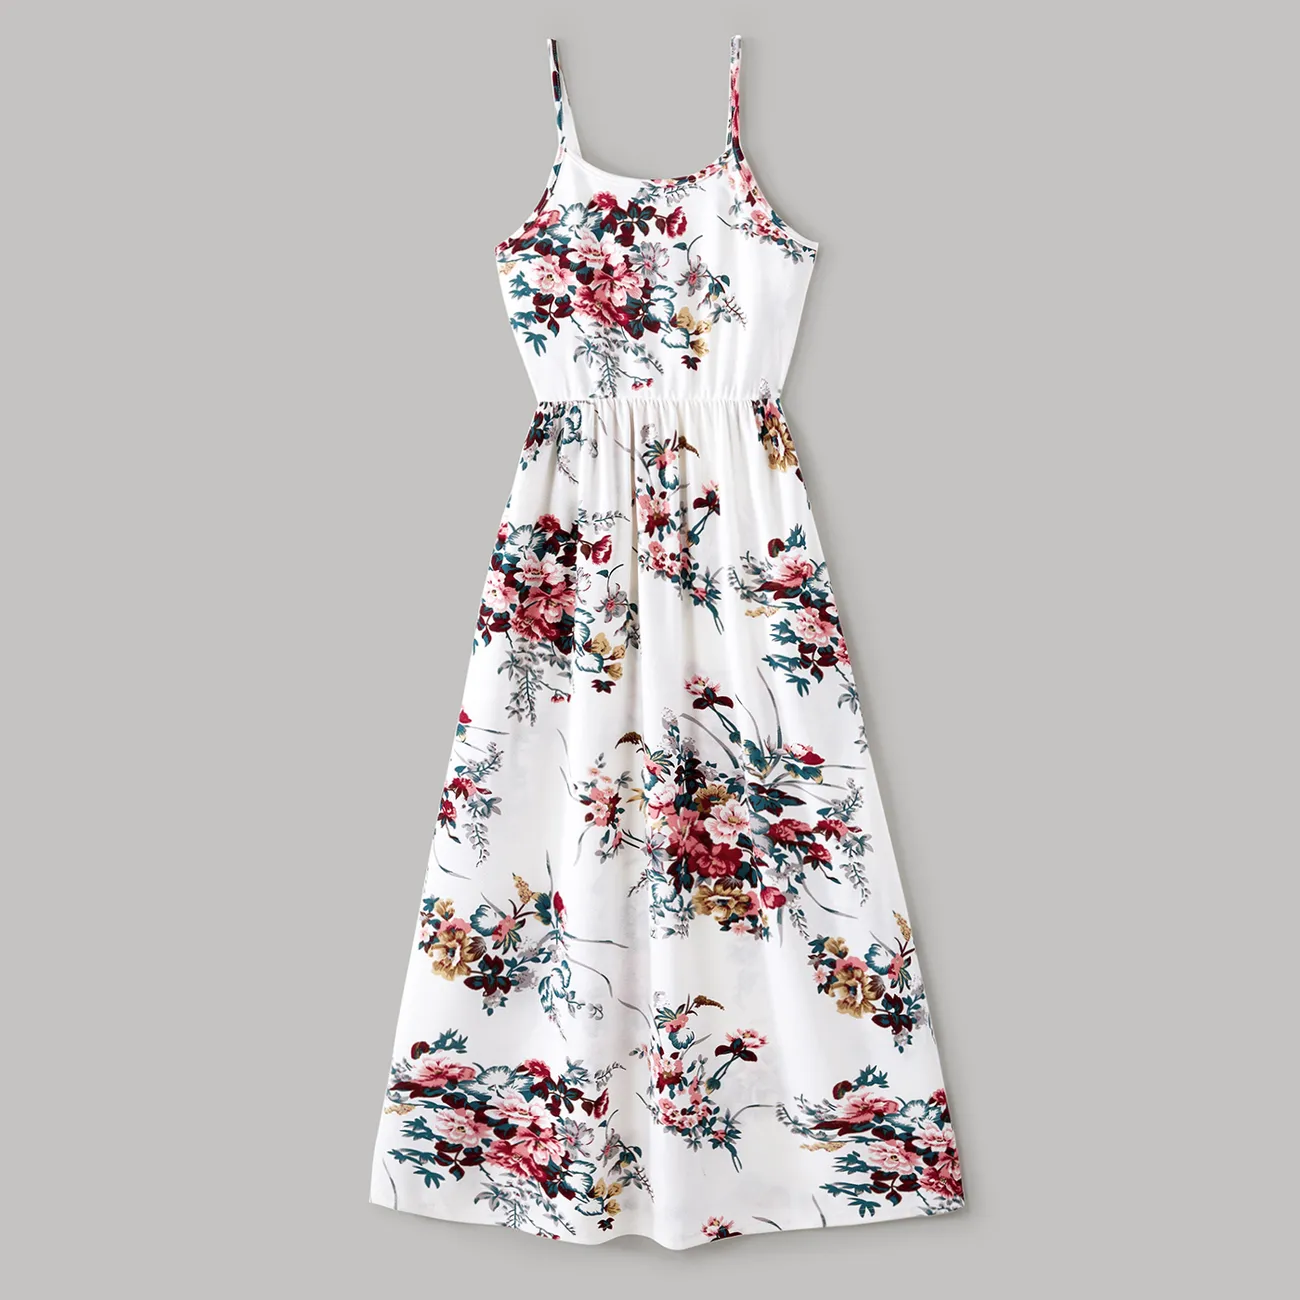 Family Matching All Over Floral Print Spaghetti Strap Dresses and Colorblock Short-sleeve T-shirts Sets White big image 1